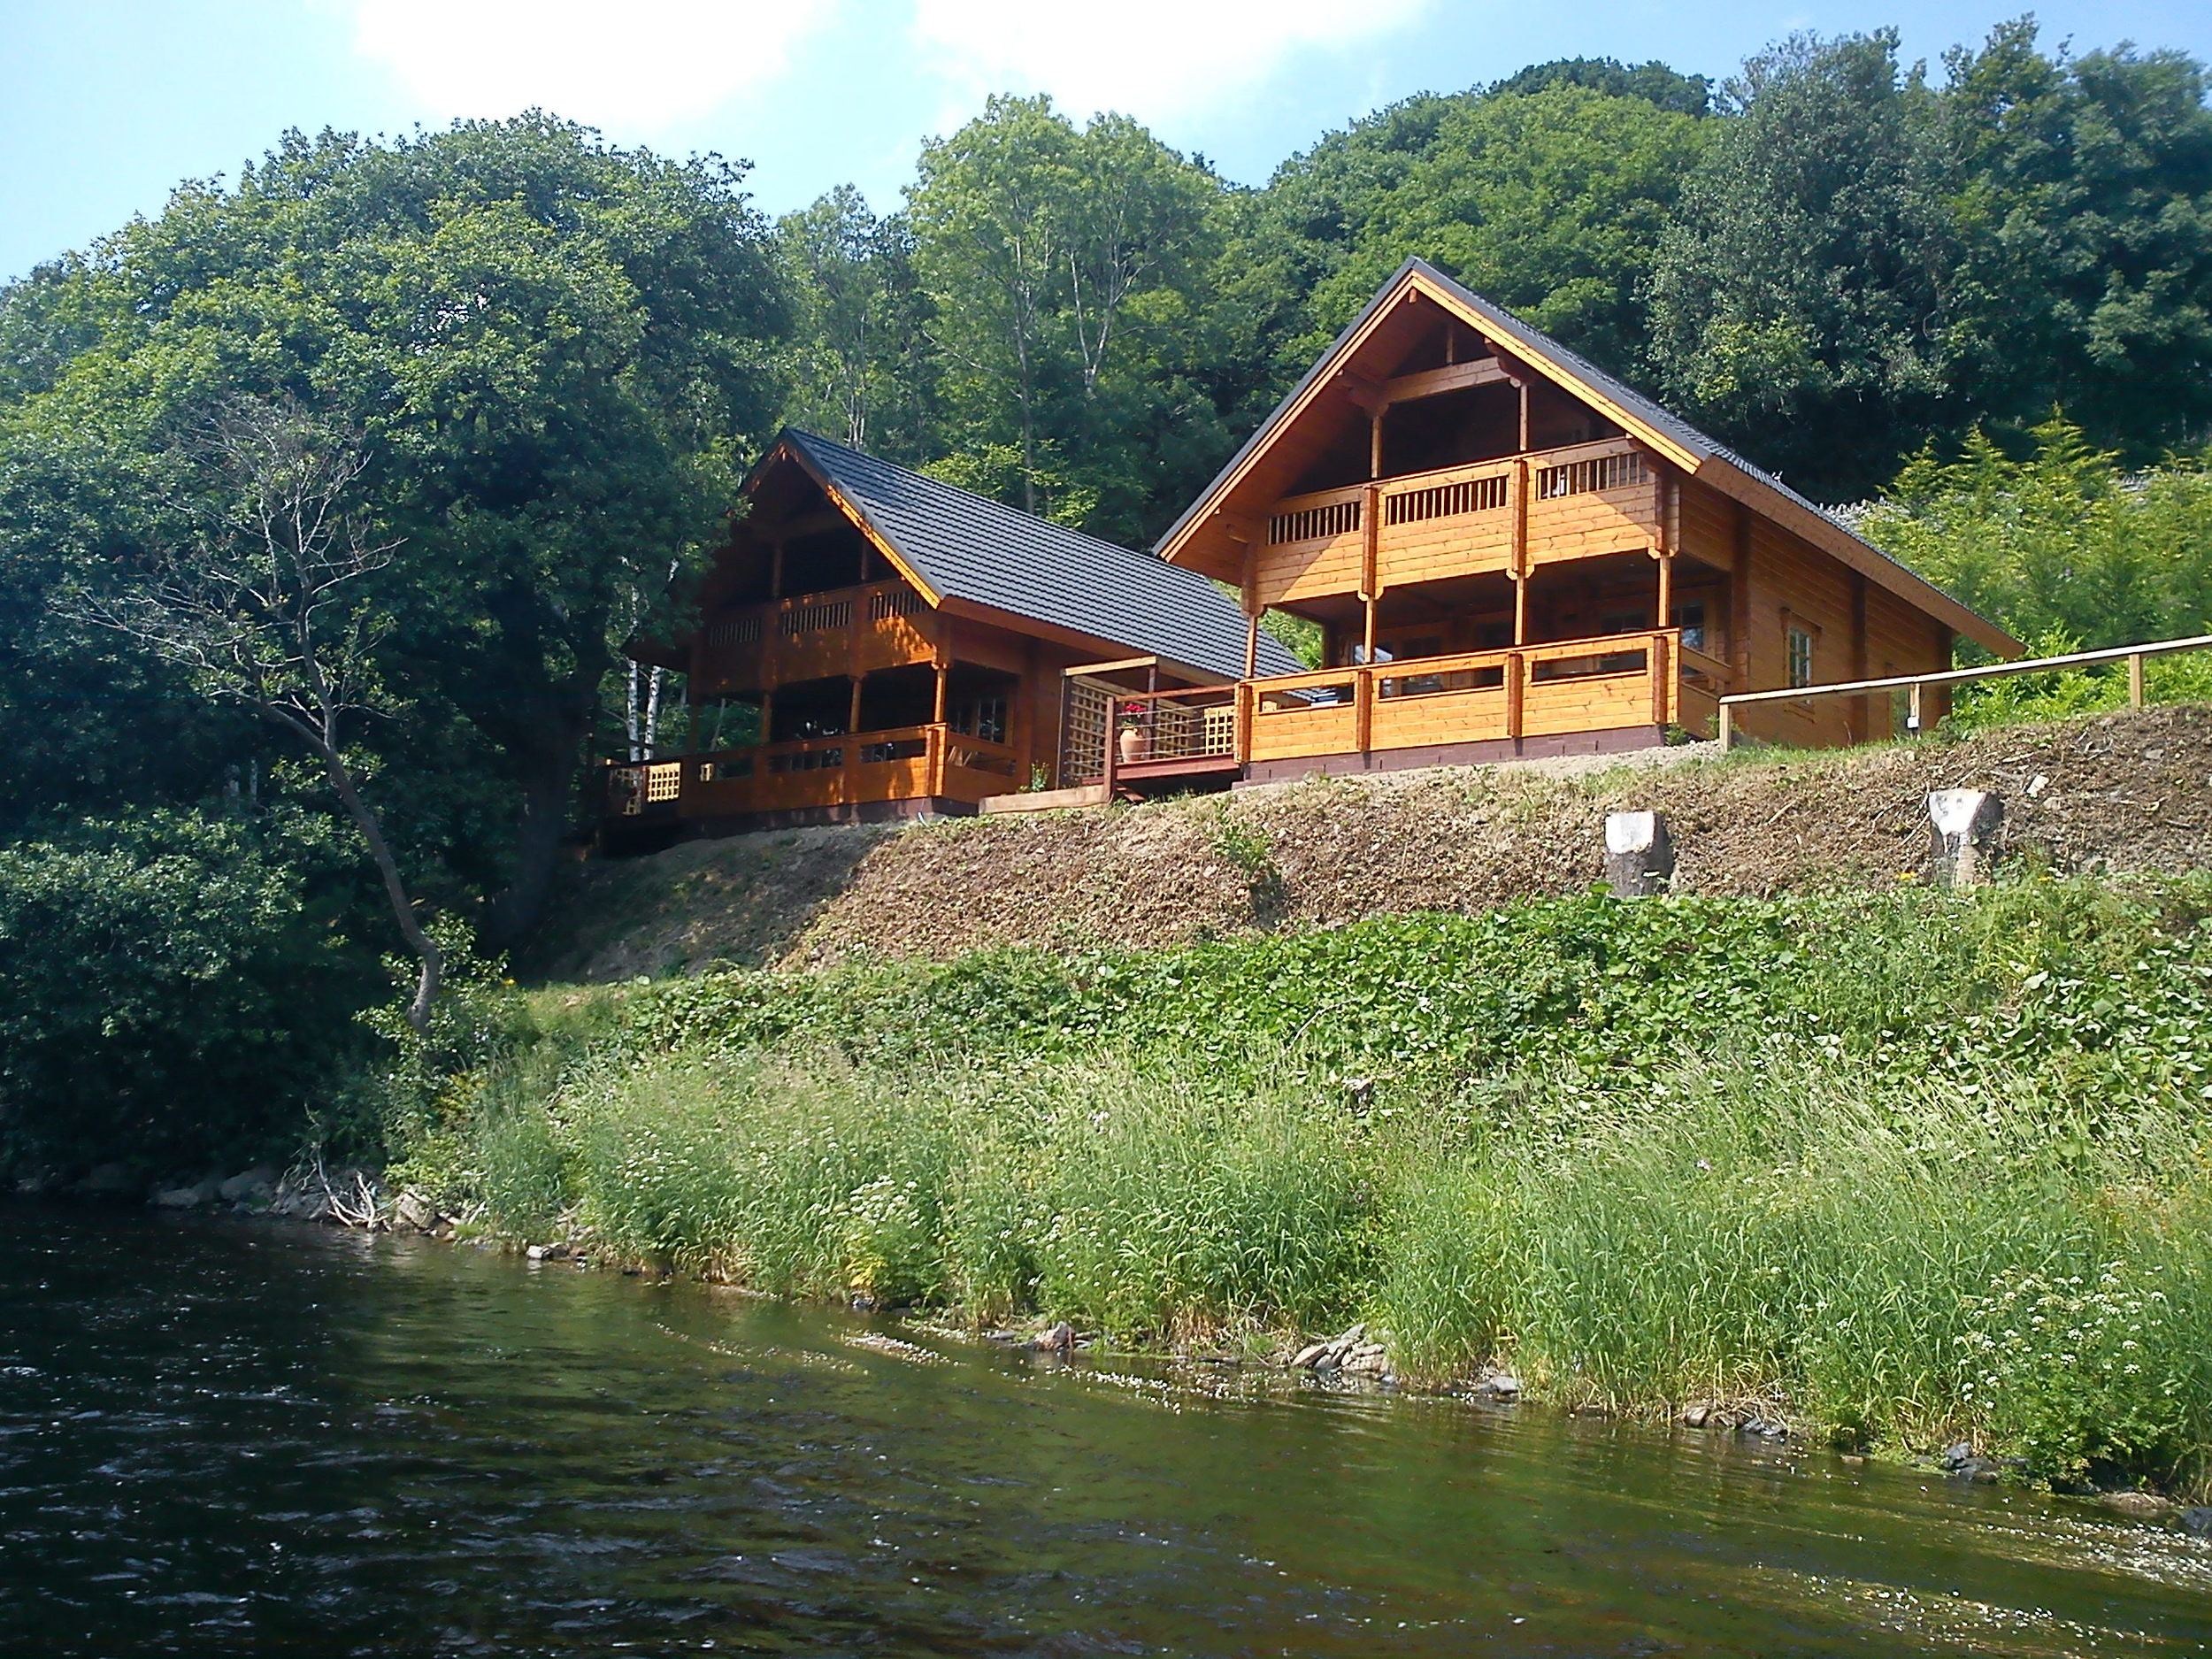  Welcome to   Coed-Y-Glyn Log Cabins    Take A Look  